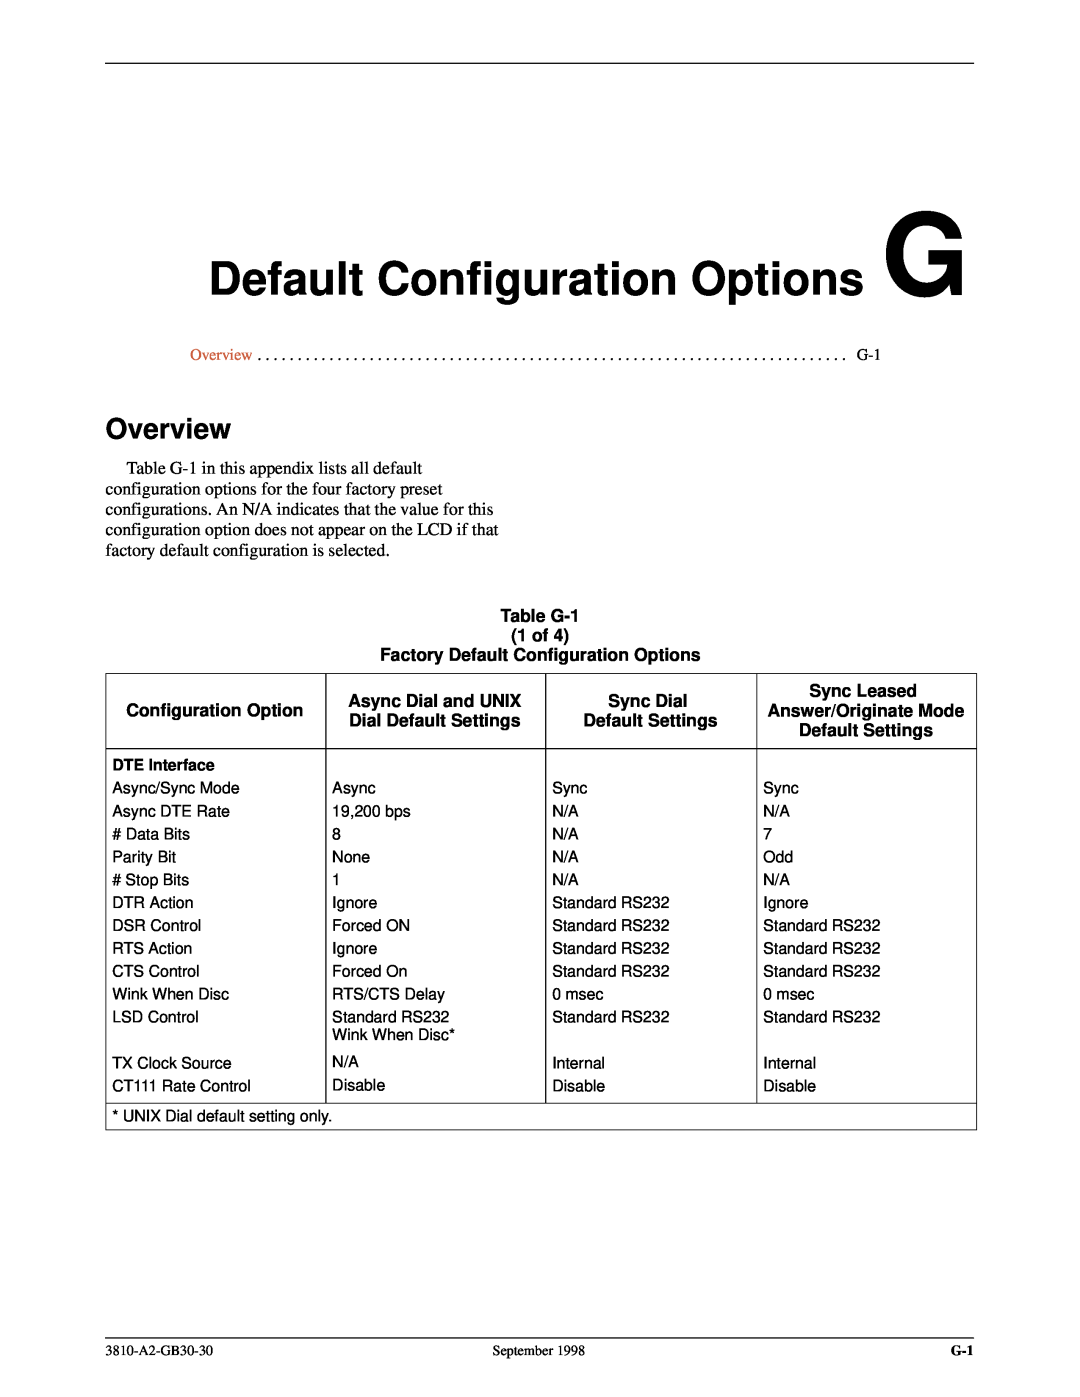 Paradyne 3800 Default Configuration Options G, Table G-1 1 of Factory Default Configuration Options, Async Dial and UNIX 